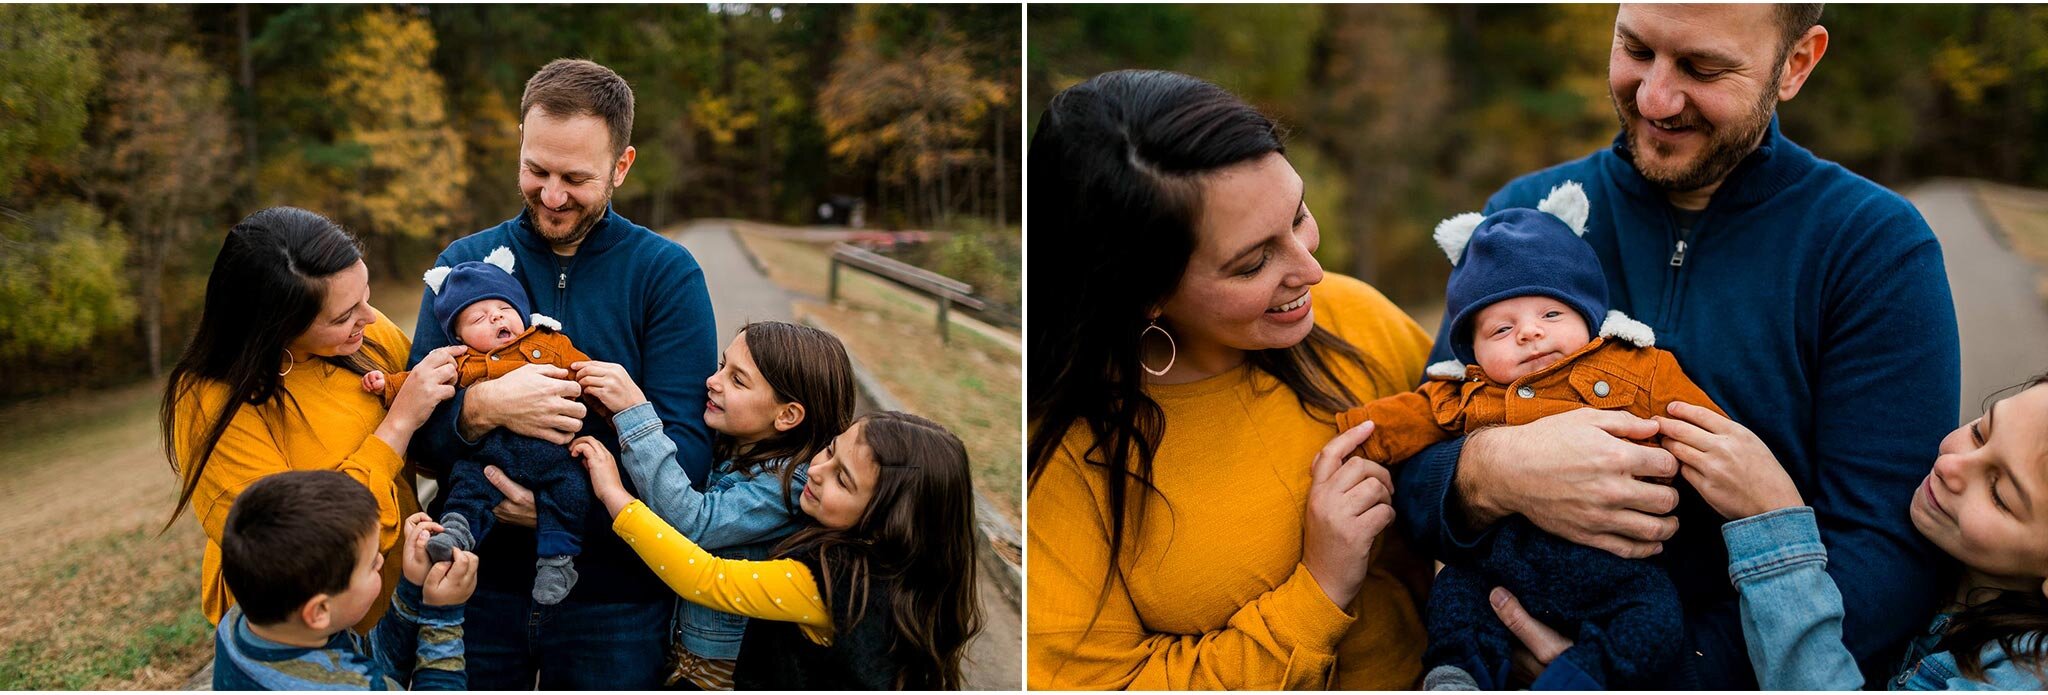 Raleigh Family Photographer | By G. Lin Photography | Fall Outdoor Photo at Umstead Park